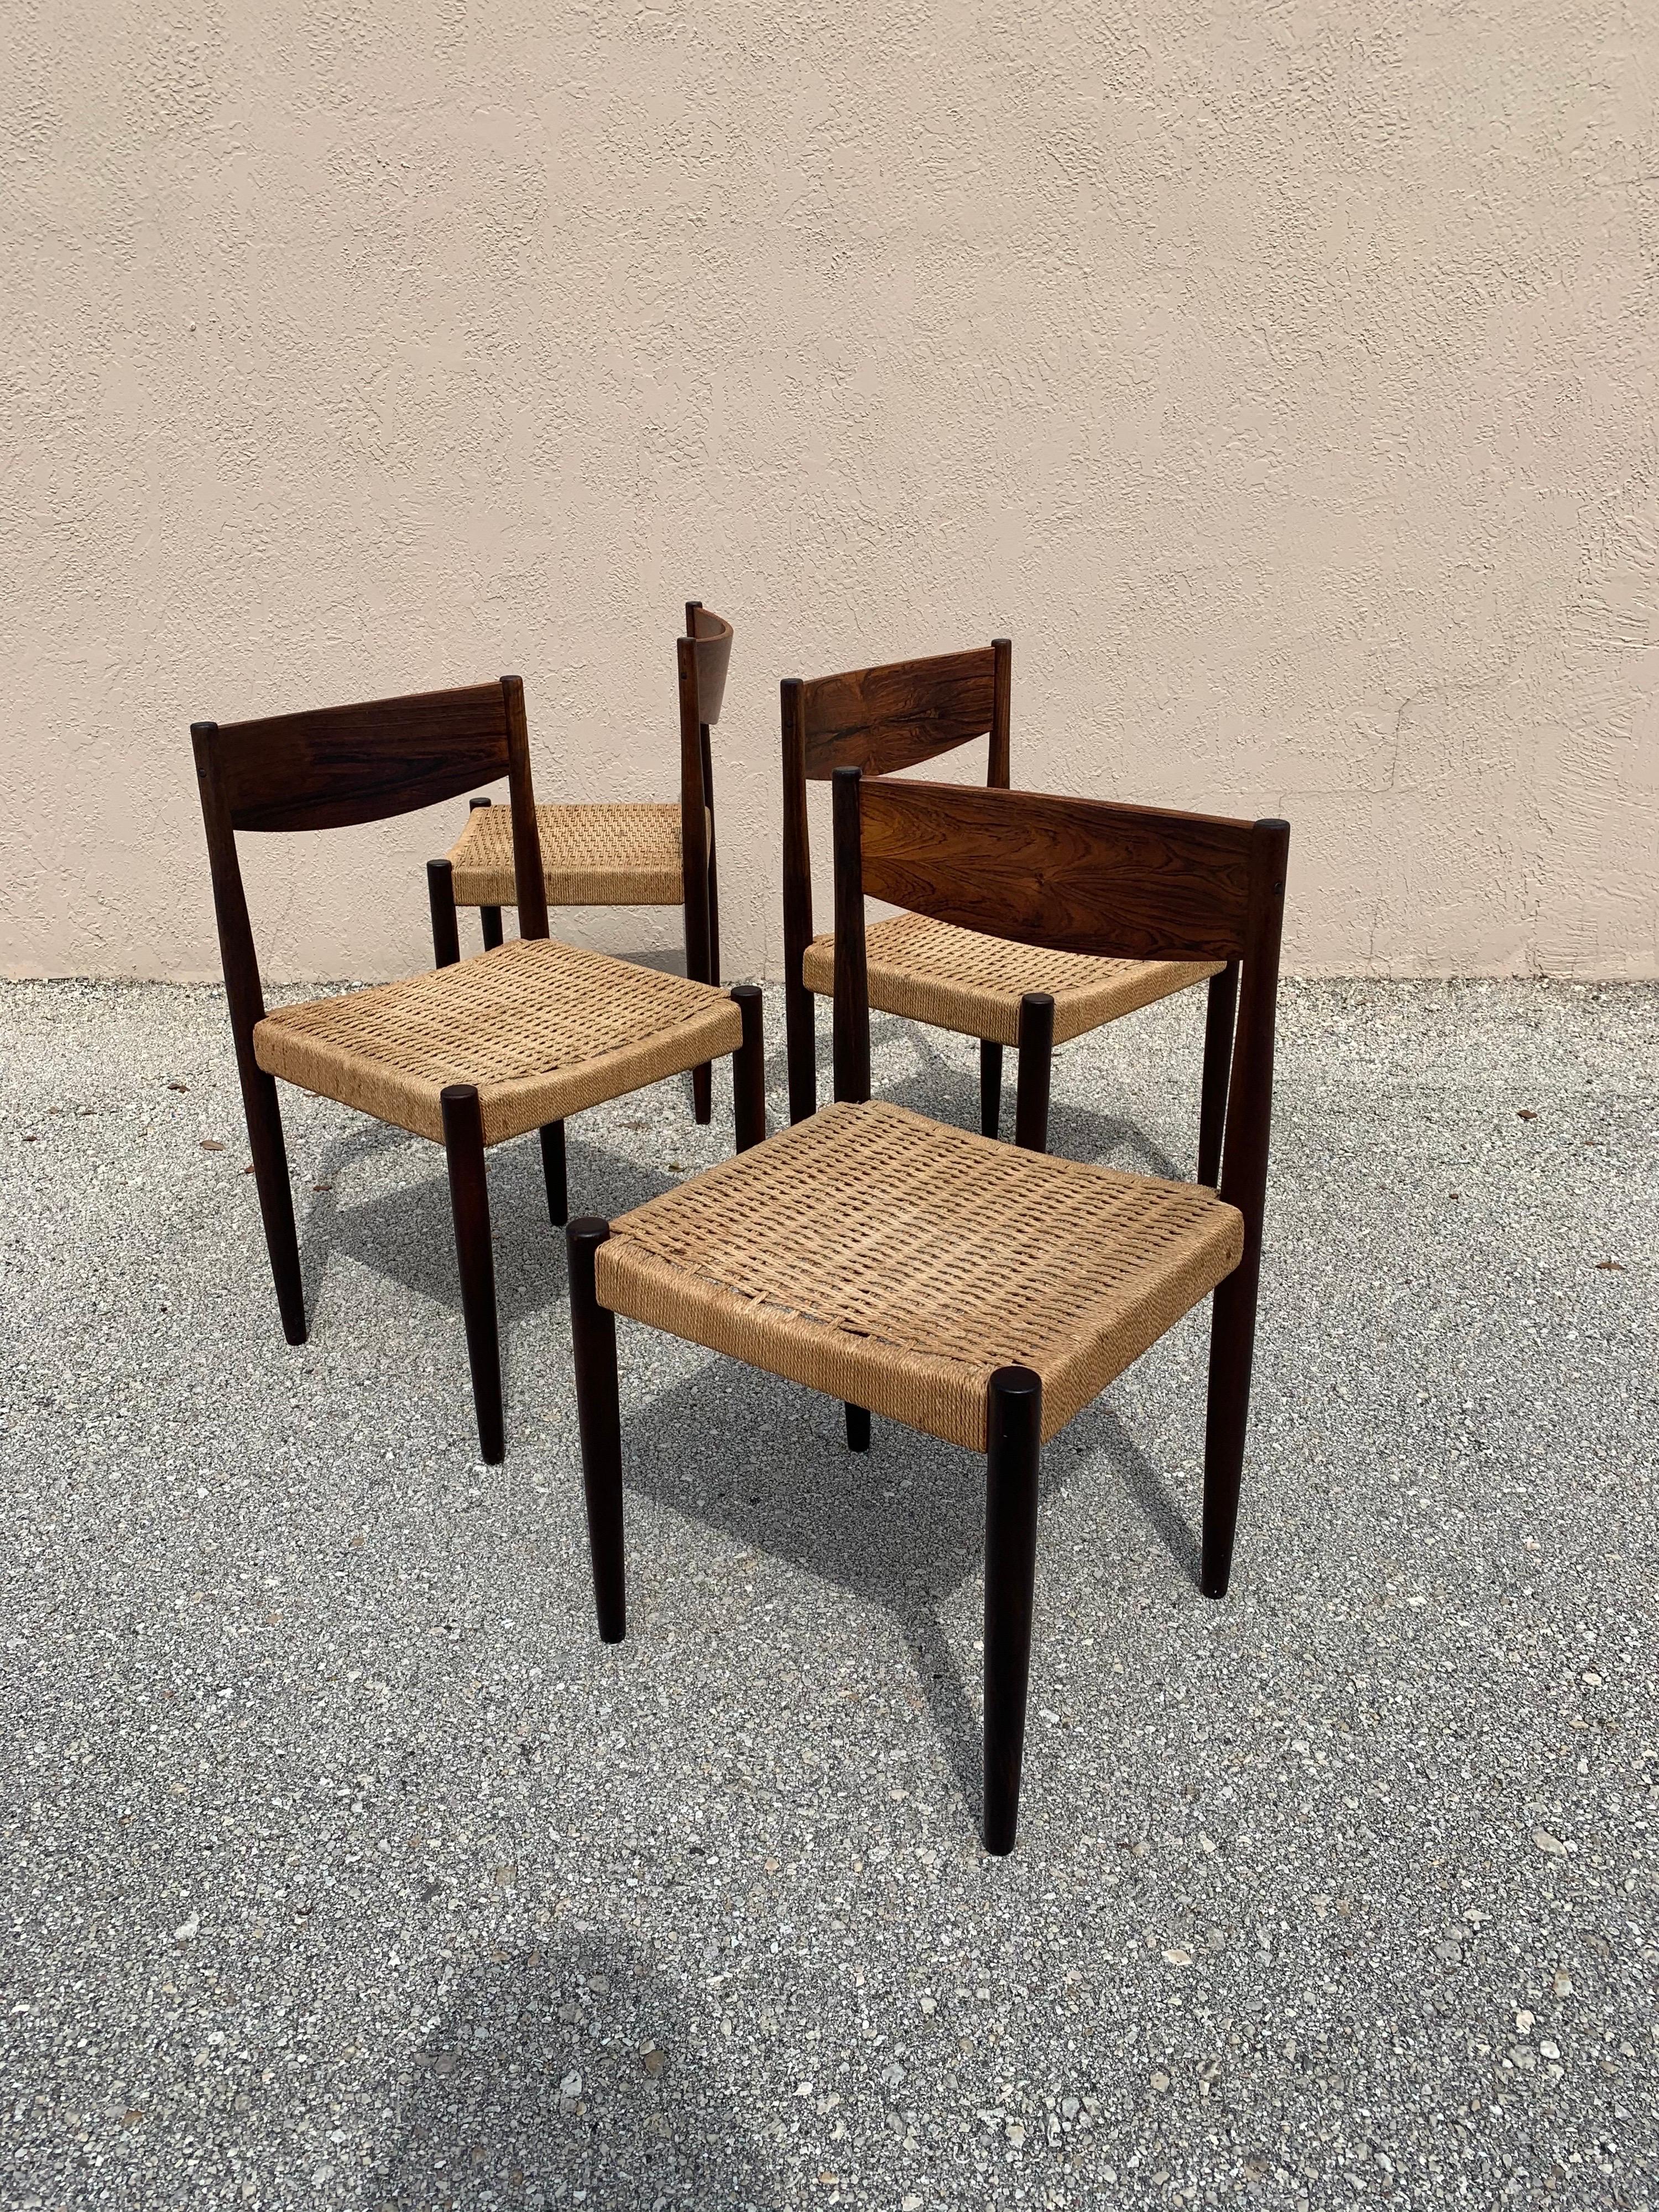 Gorgeous set of dining chairs designed by Poul Volther for Frem Rojle. In rosewood and Danish cord. Refinished from their originally dark finish to reveal more of the natural wood grain. Legs have a slight ombré with a lighter top gradually getting